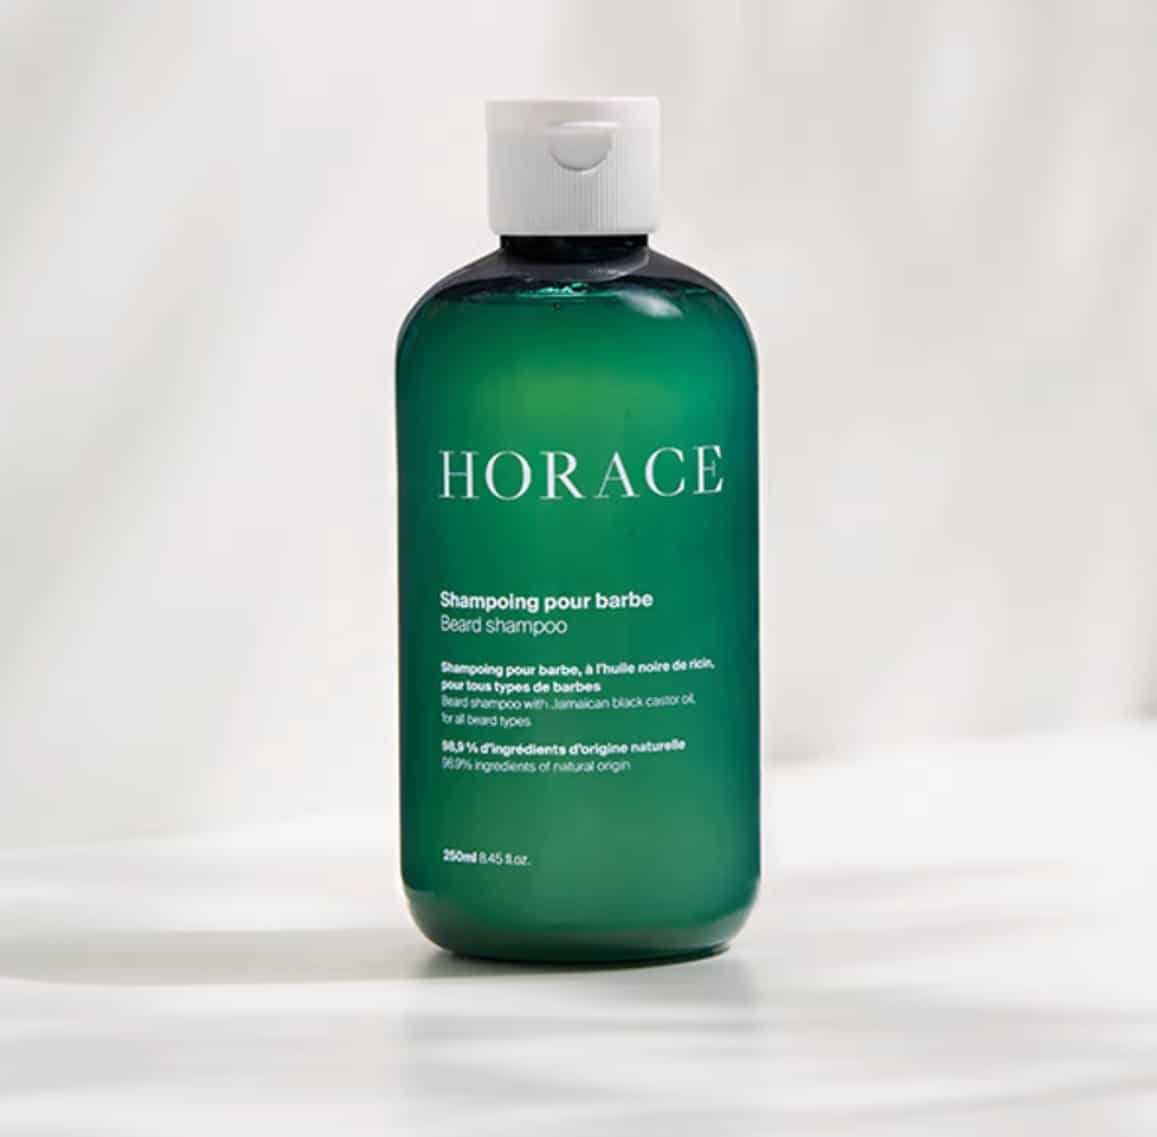 Shampoing pour barbe Horace